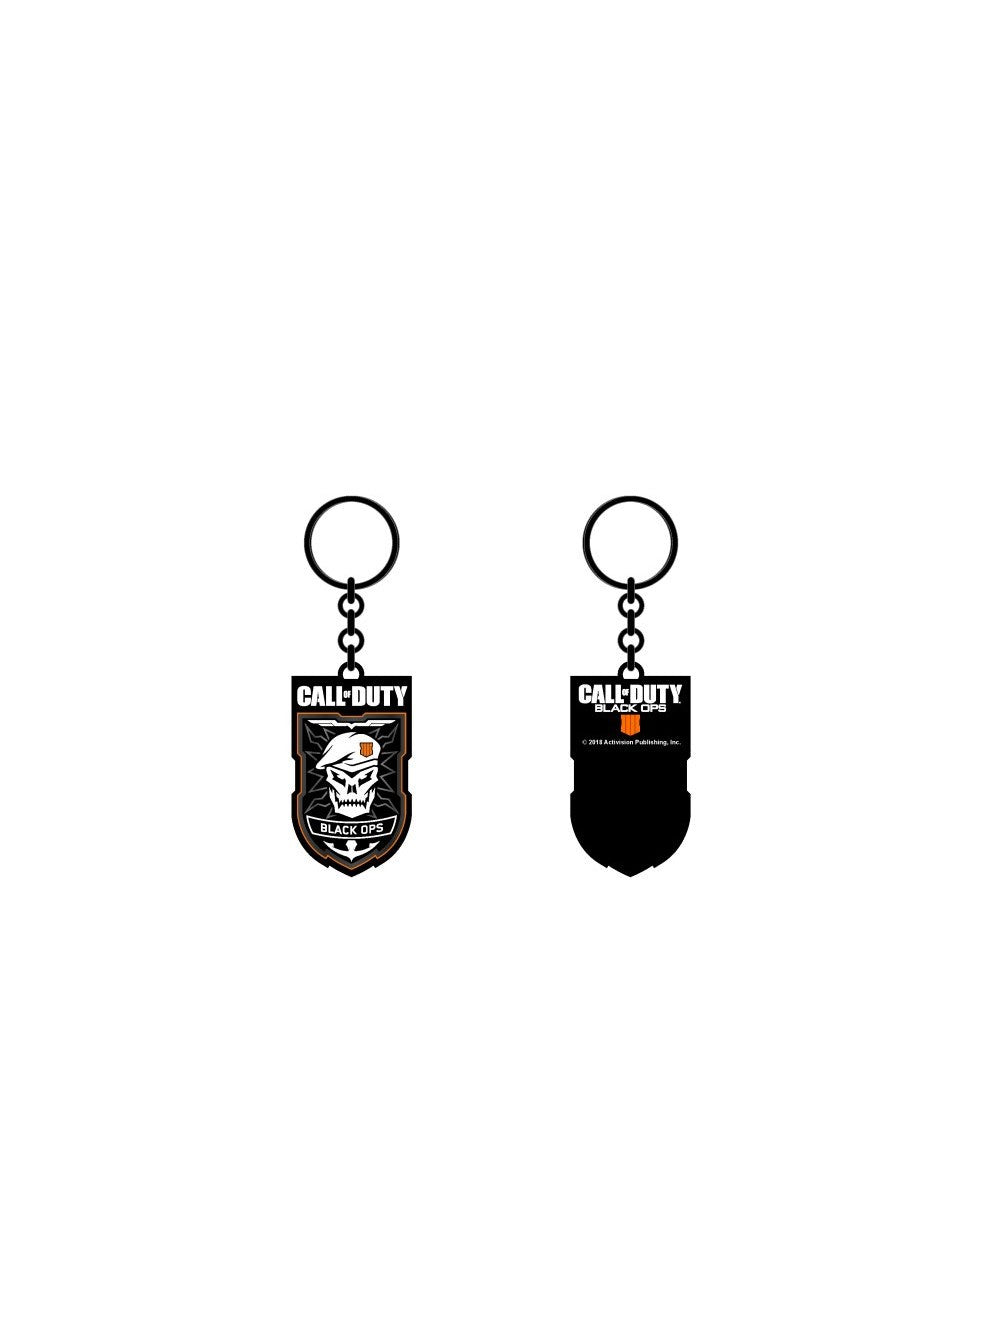 CALL OF DUTY - Black OPS 4 Keychain